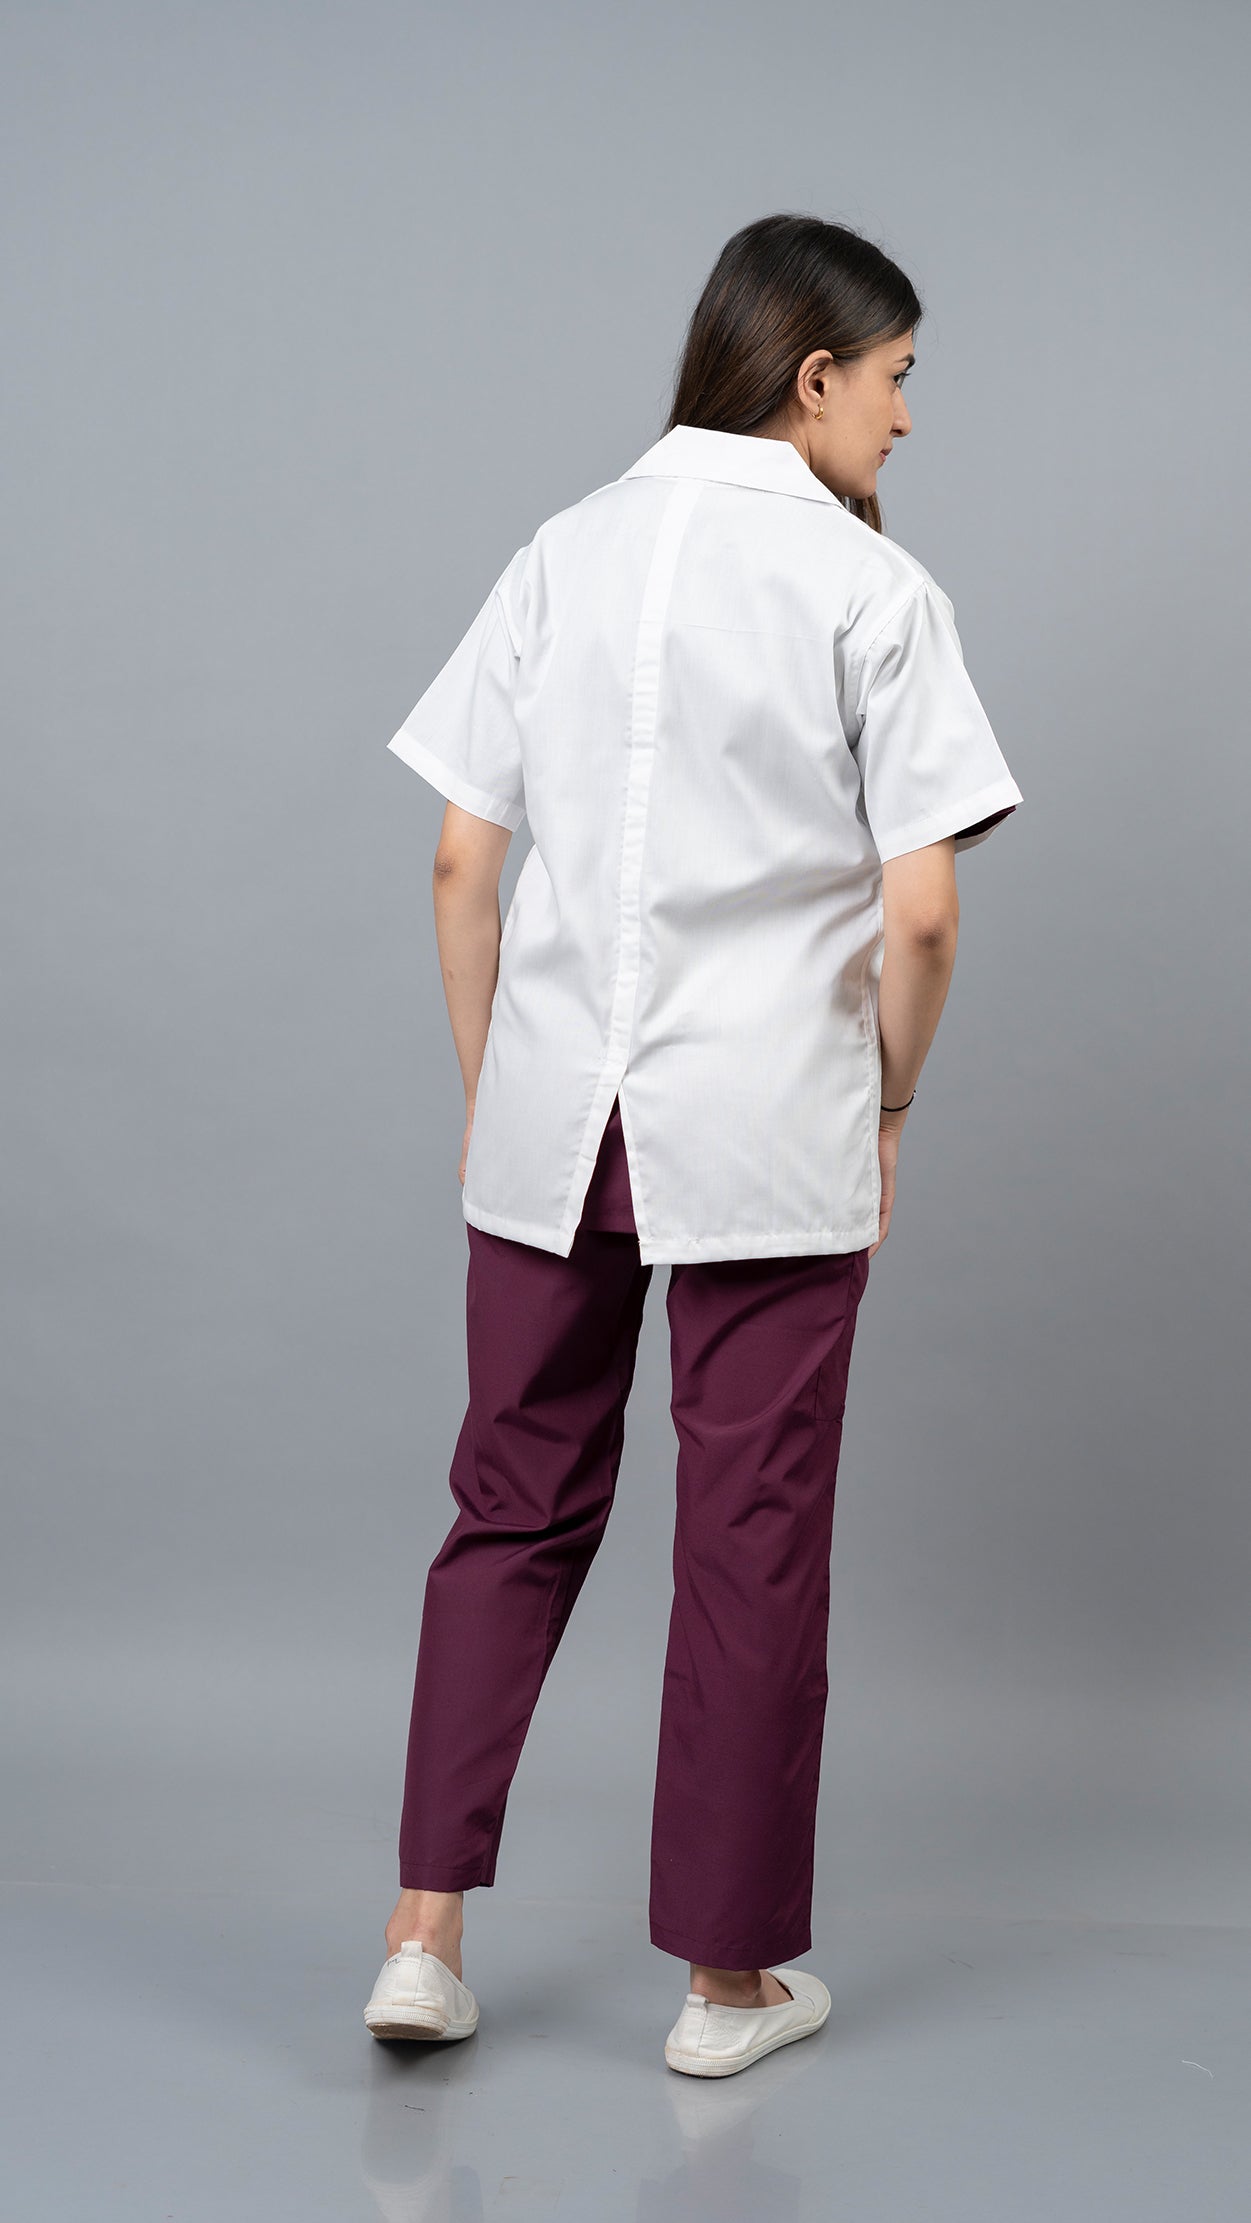 VastraMedwear Half Sleeves Lab Coat/Apron for Chemistry Lab and Medical Students Women